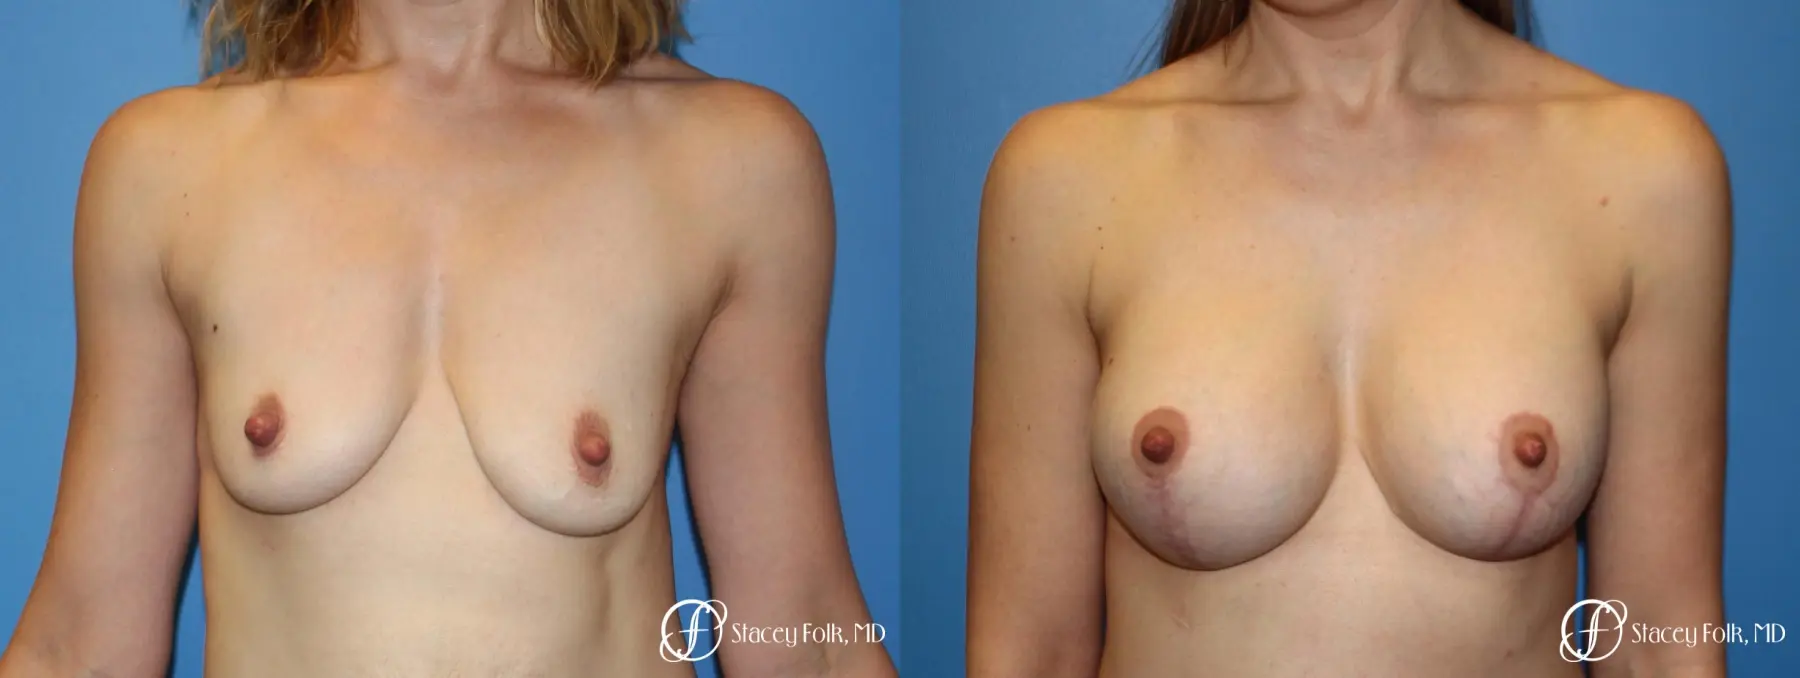 Denver Breast lift and Augmentation 7850 - Before and After